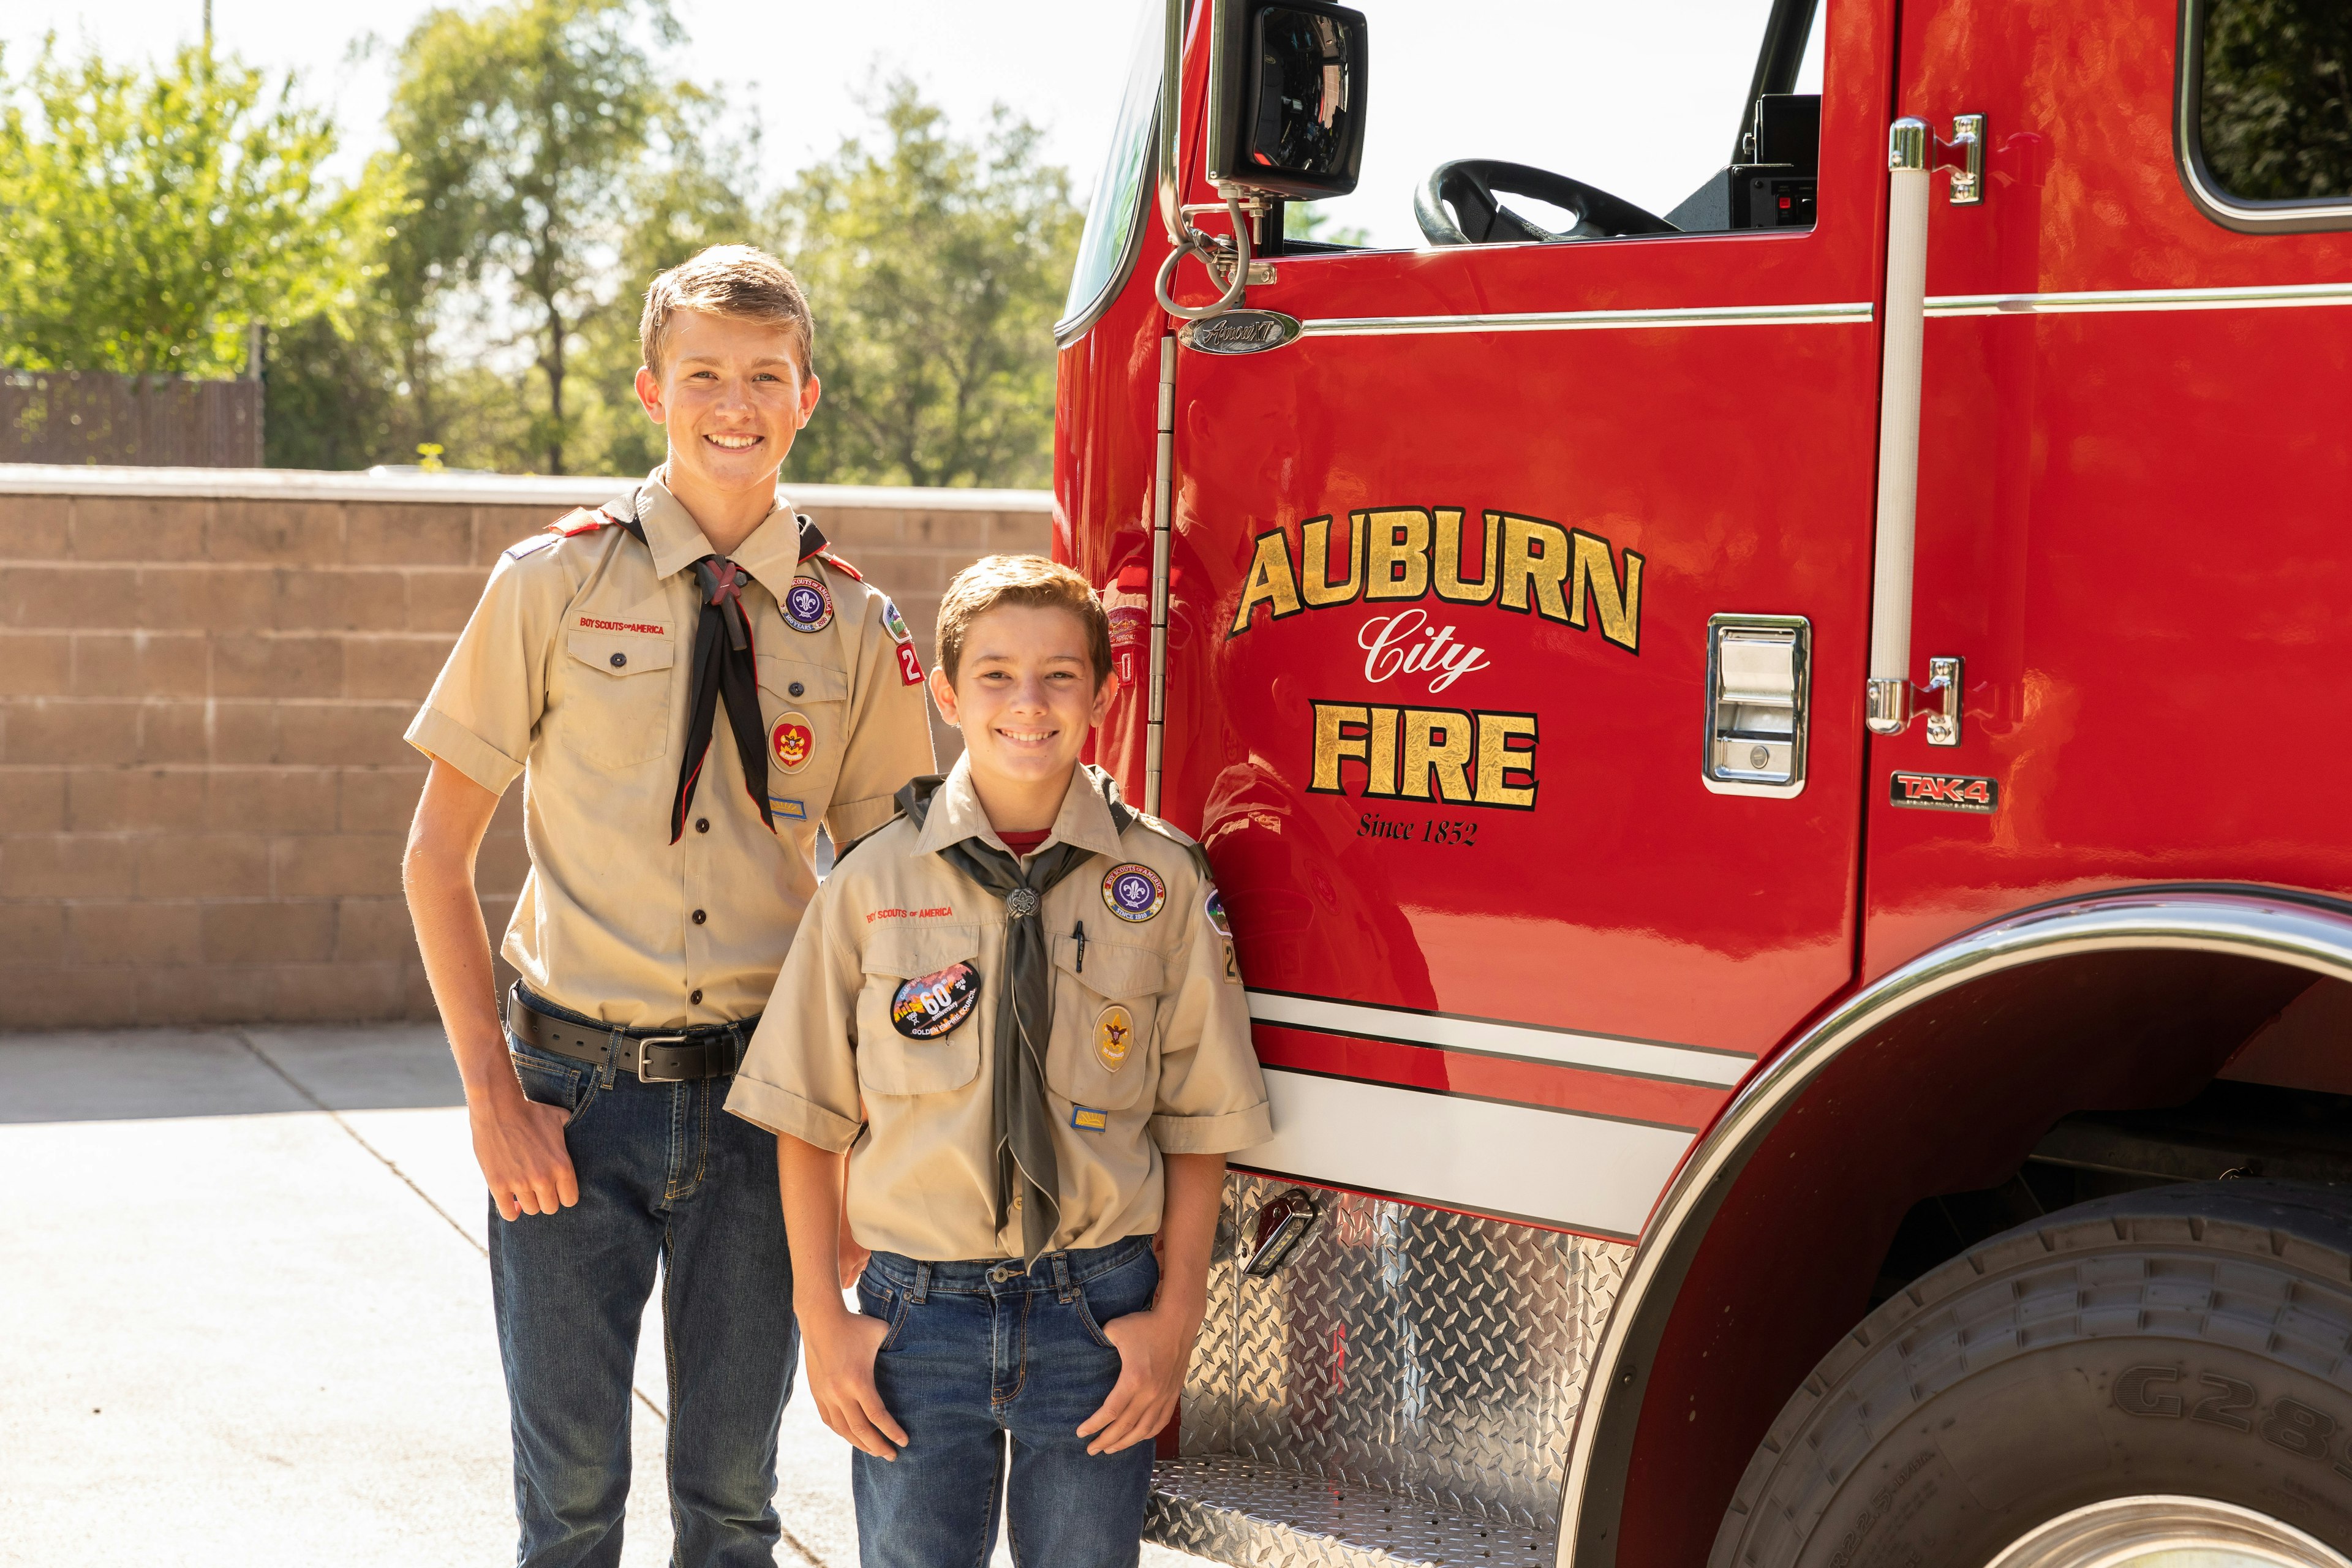 Boys Scouts with Auburn Fire